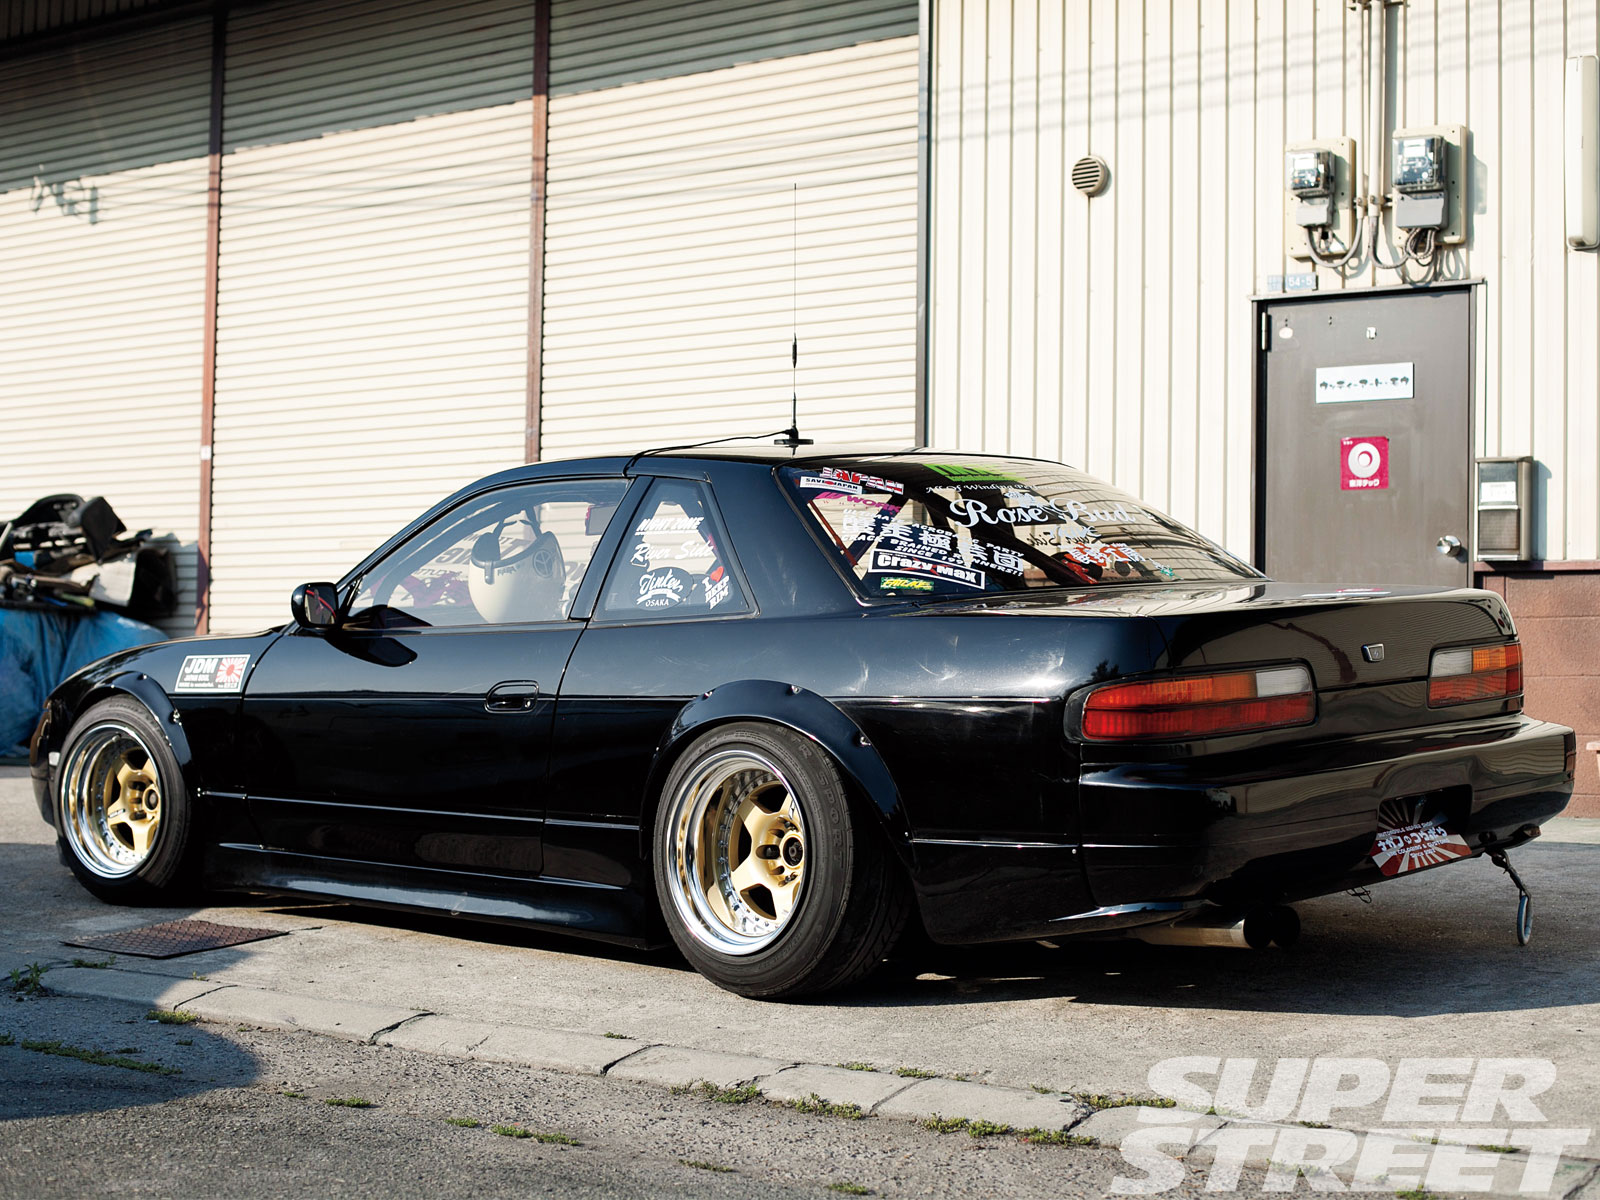 Nissan Silvia S13 And Onevia Double Your